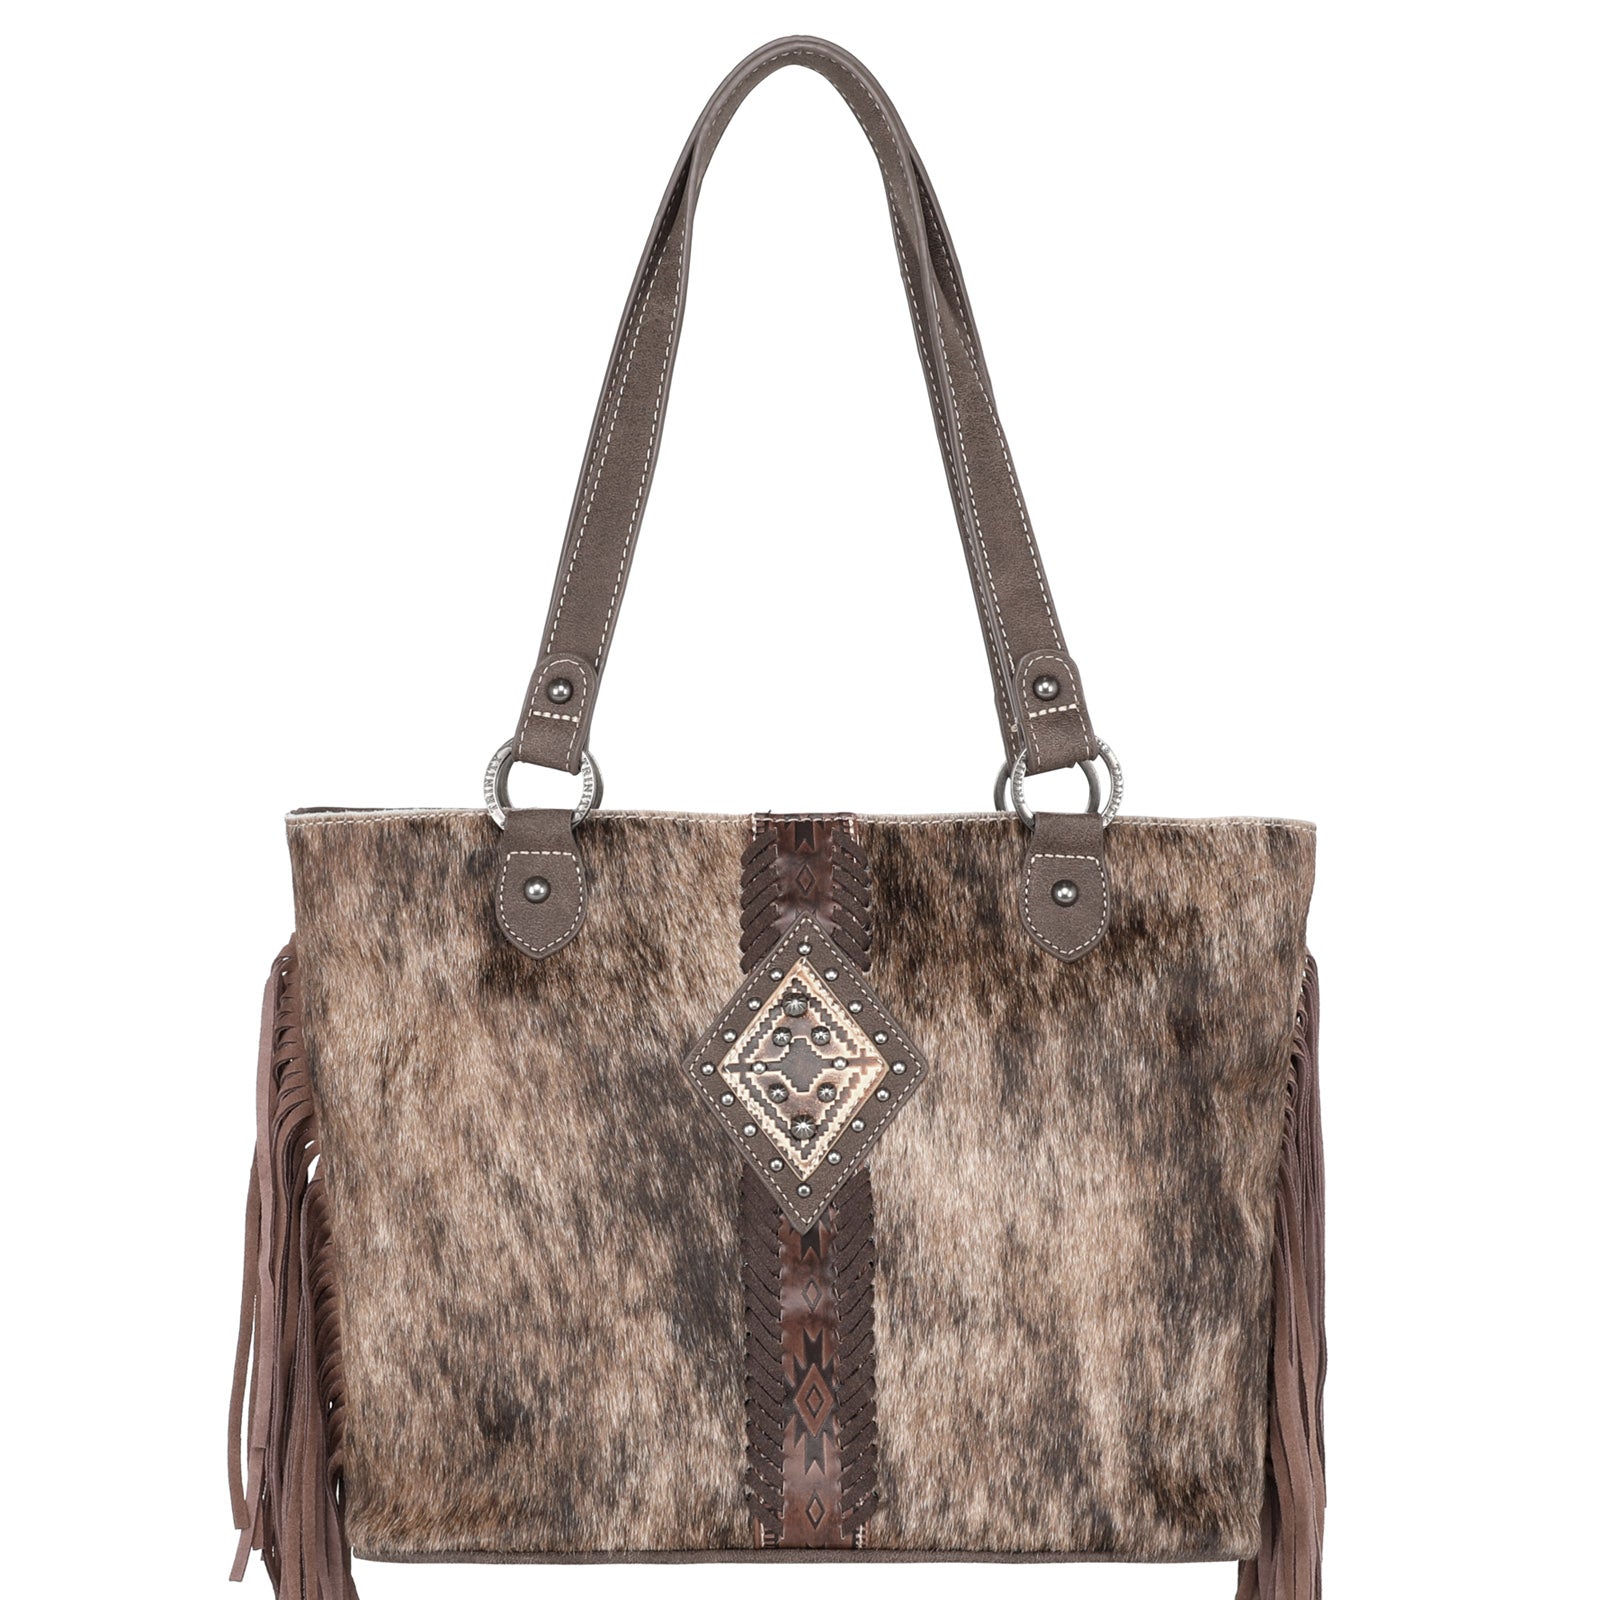 Trinity Ranch Genuine Cowhide Fringe Concealed Carry Purse - Montana West World